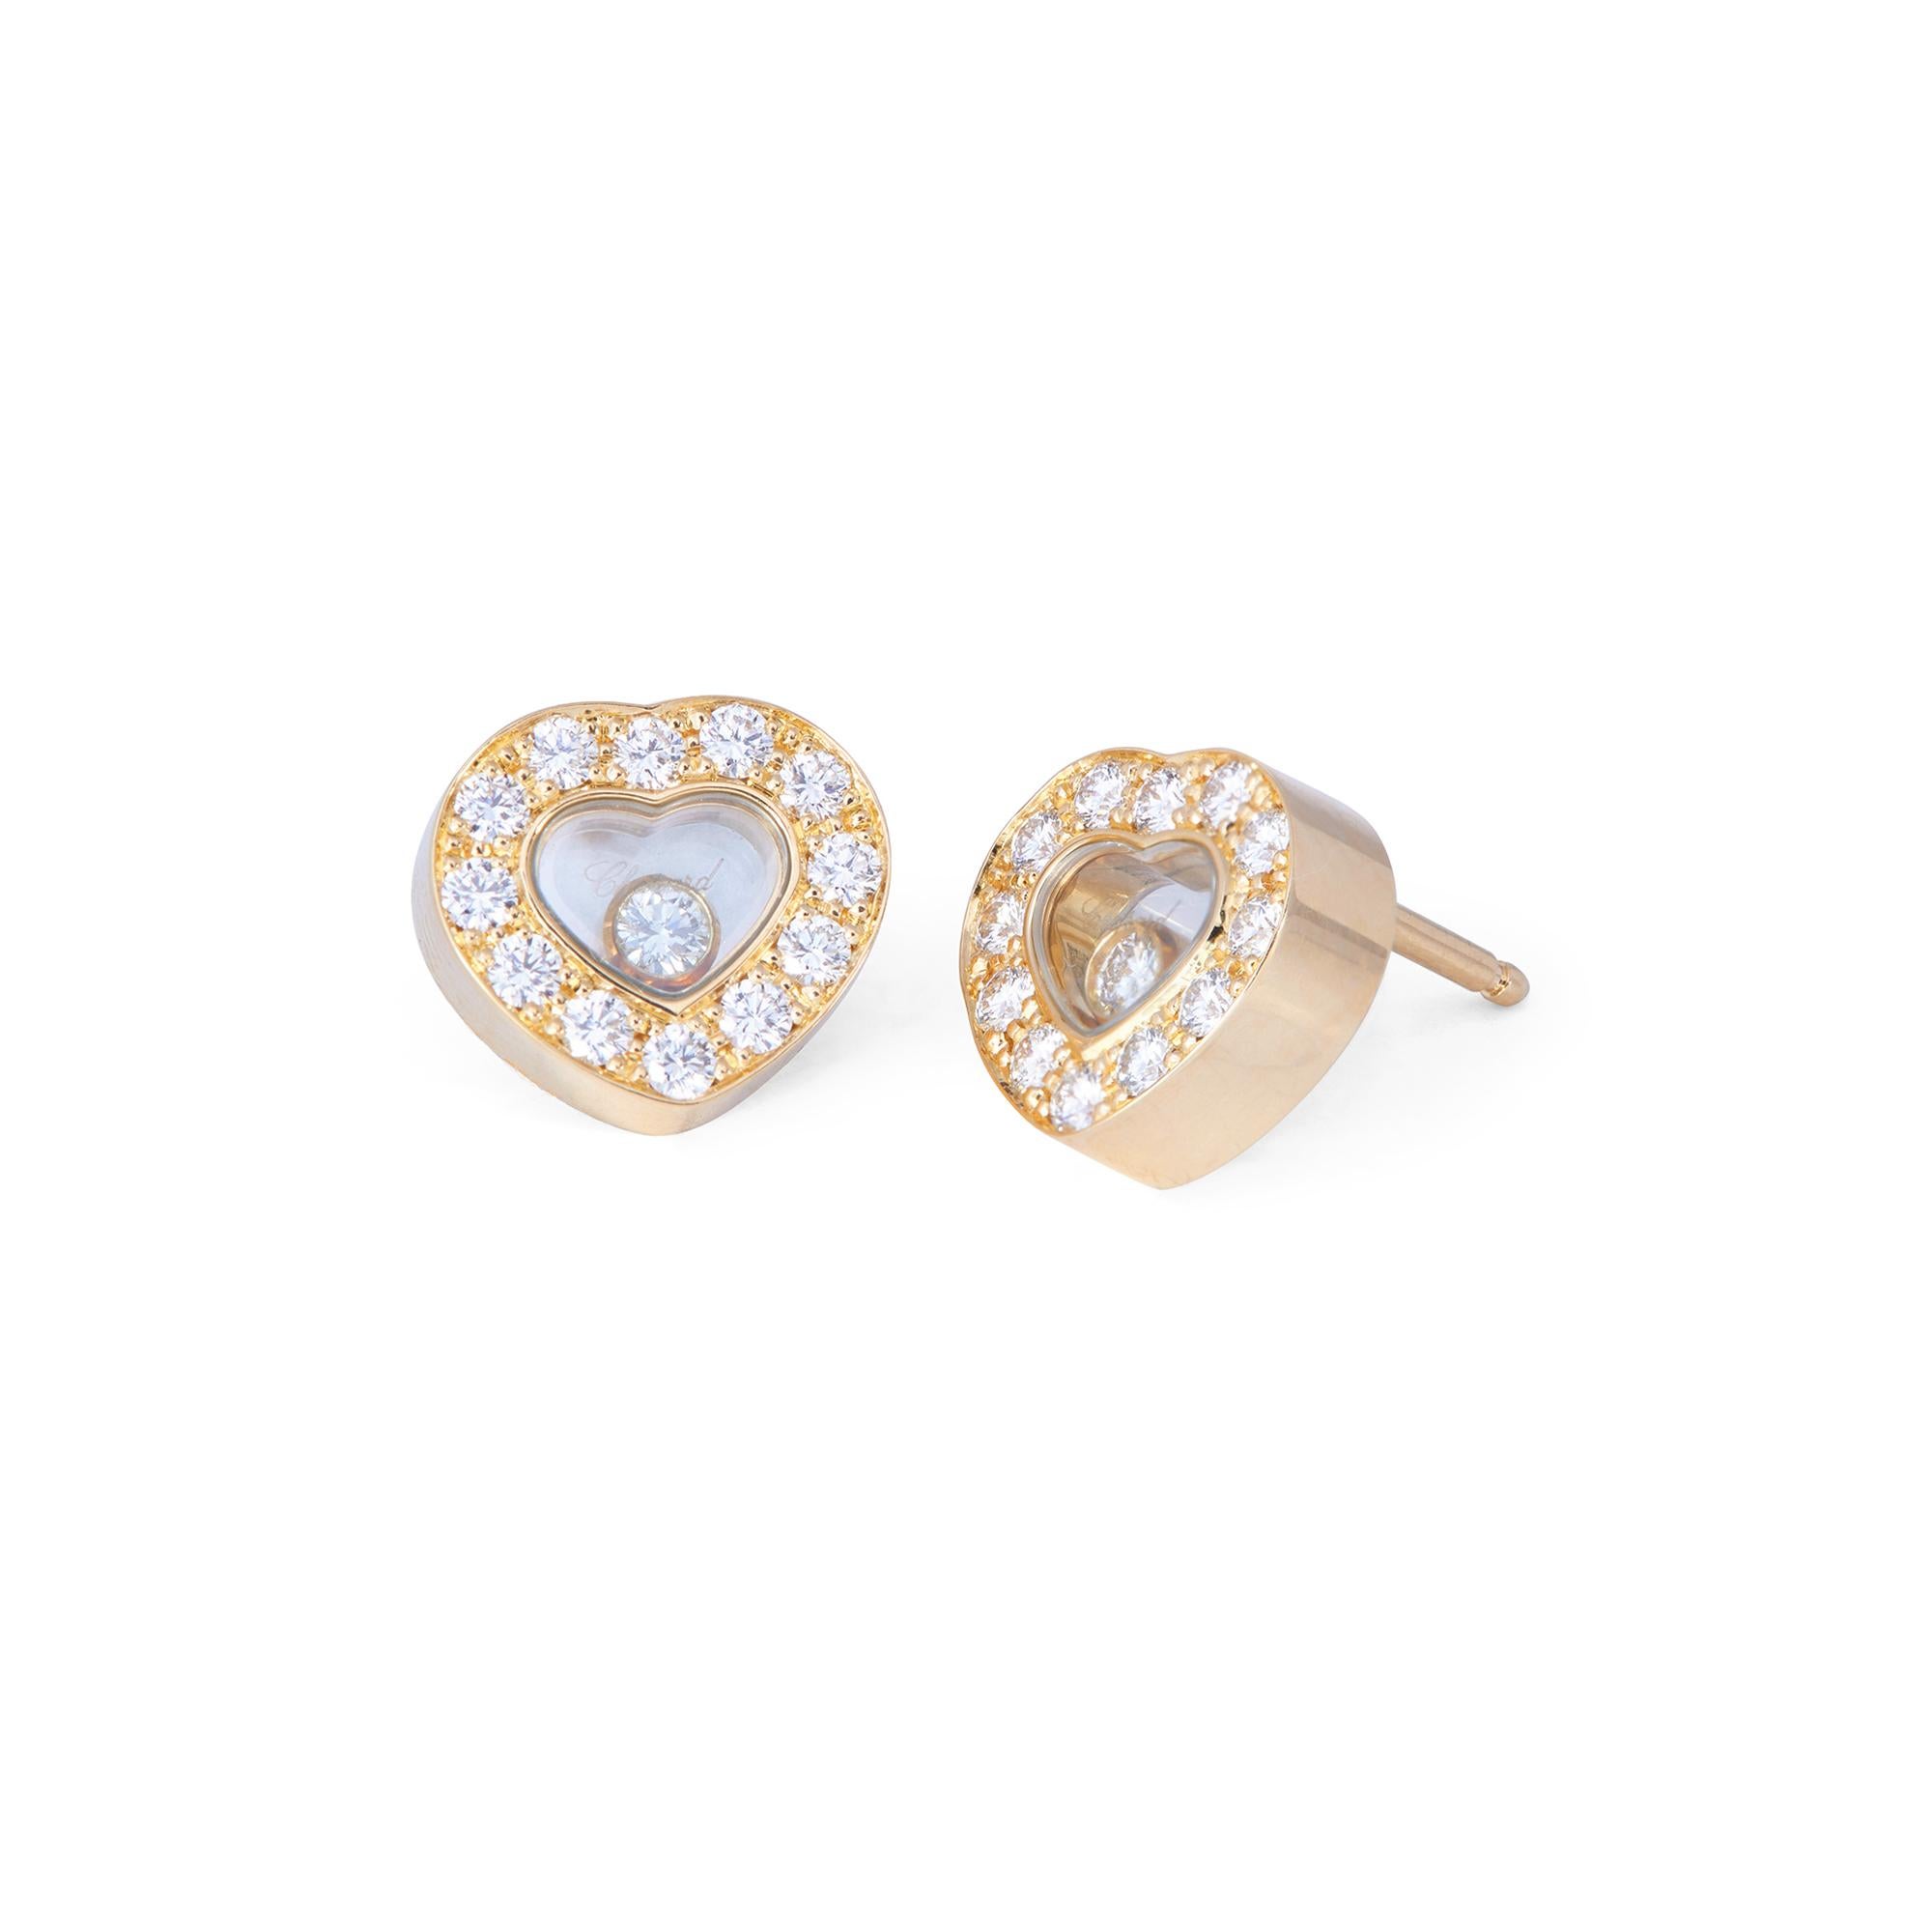 Authentic Chopard Happy Hearts earrings crafted in 18 karat yellow gold.  Each earring features Chopard's signature floating diamond surrounded by a frame of pave set round brilliant cut diamonds for an estimated 0.65 carats total weight. Signed